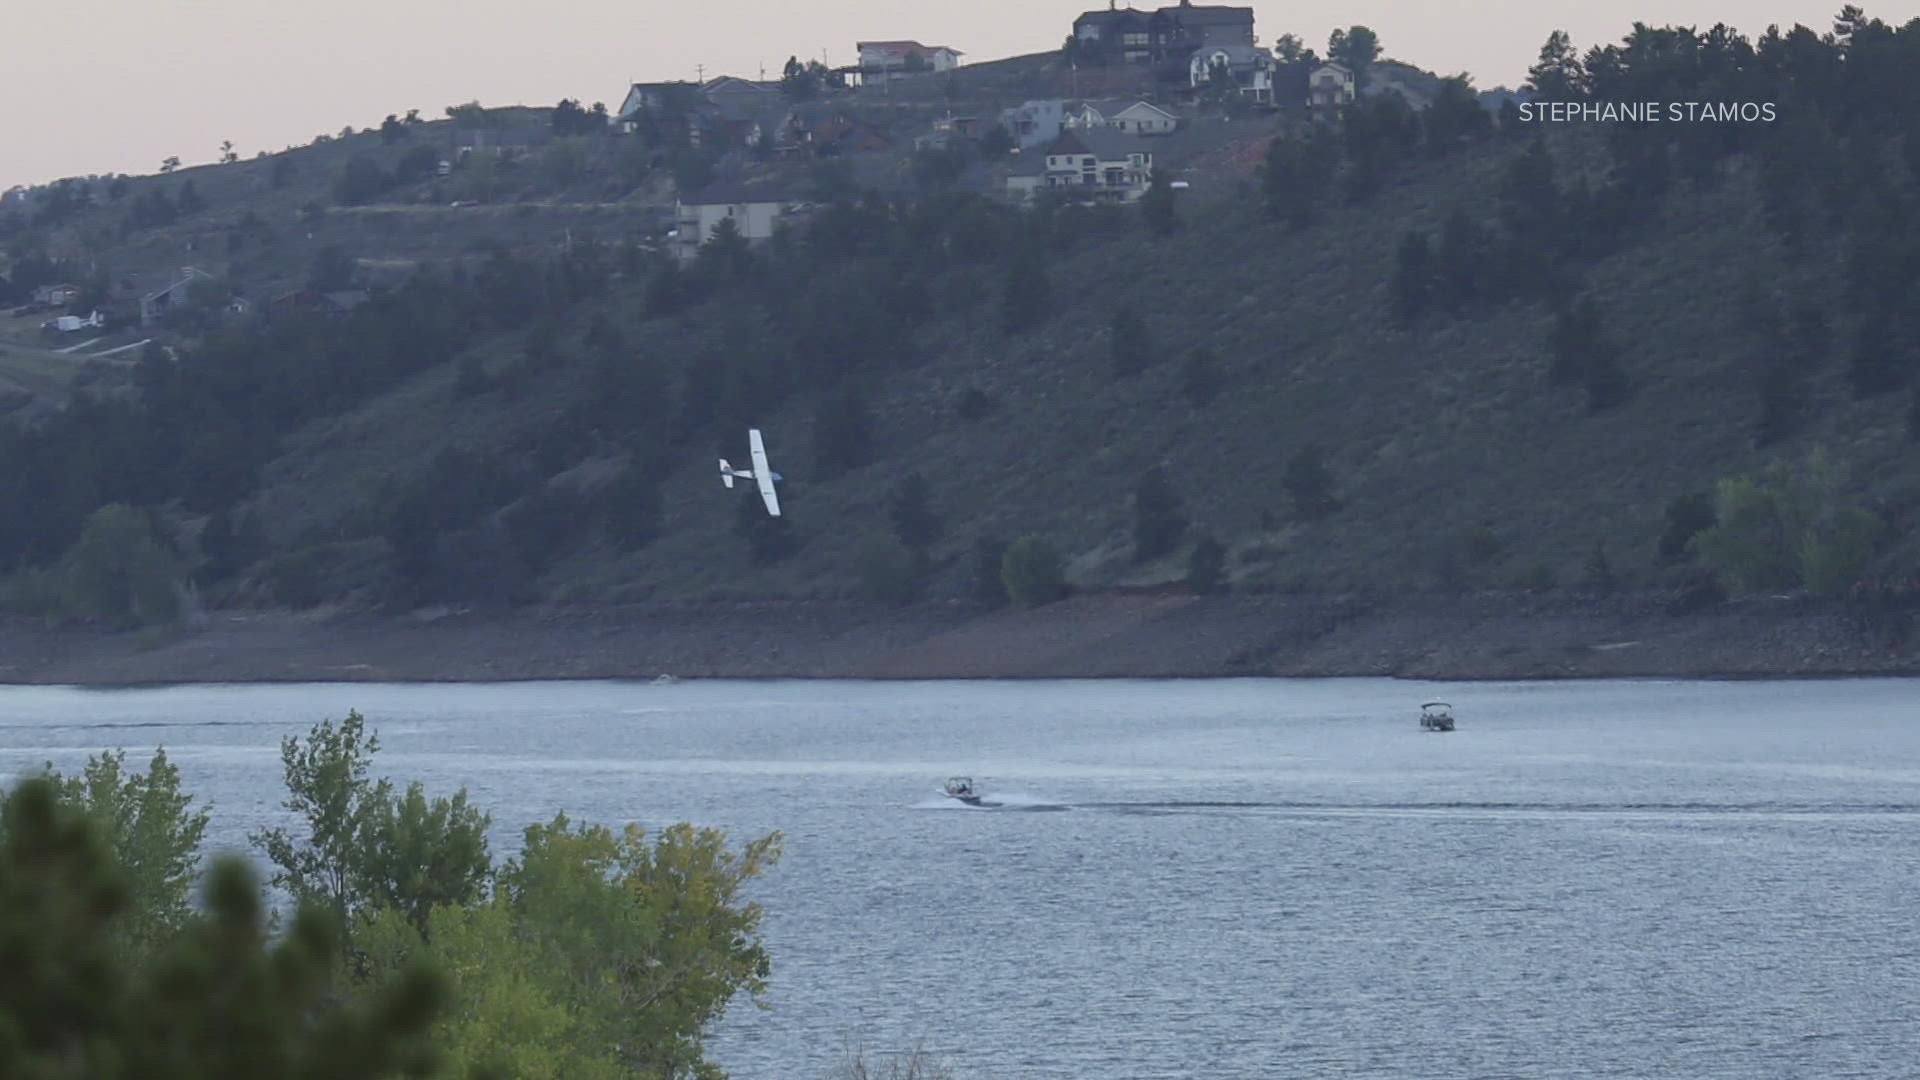 Photos show the small plane flying low over a boat at Horsetooth Reservoir prior to the Sept. 11 crash.